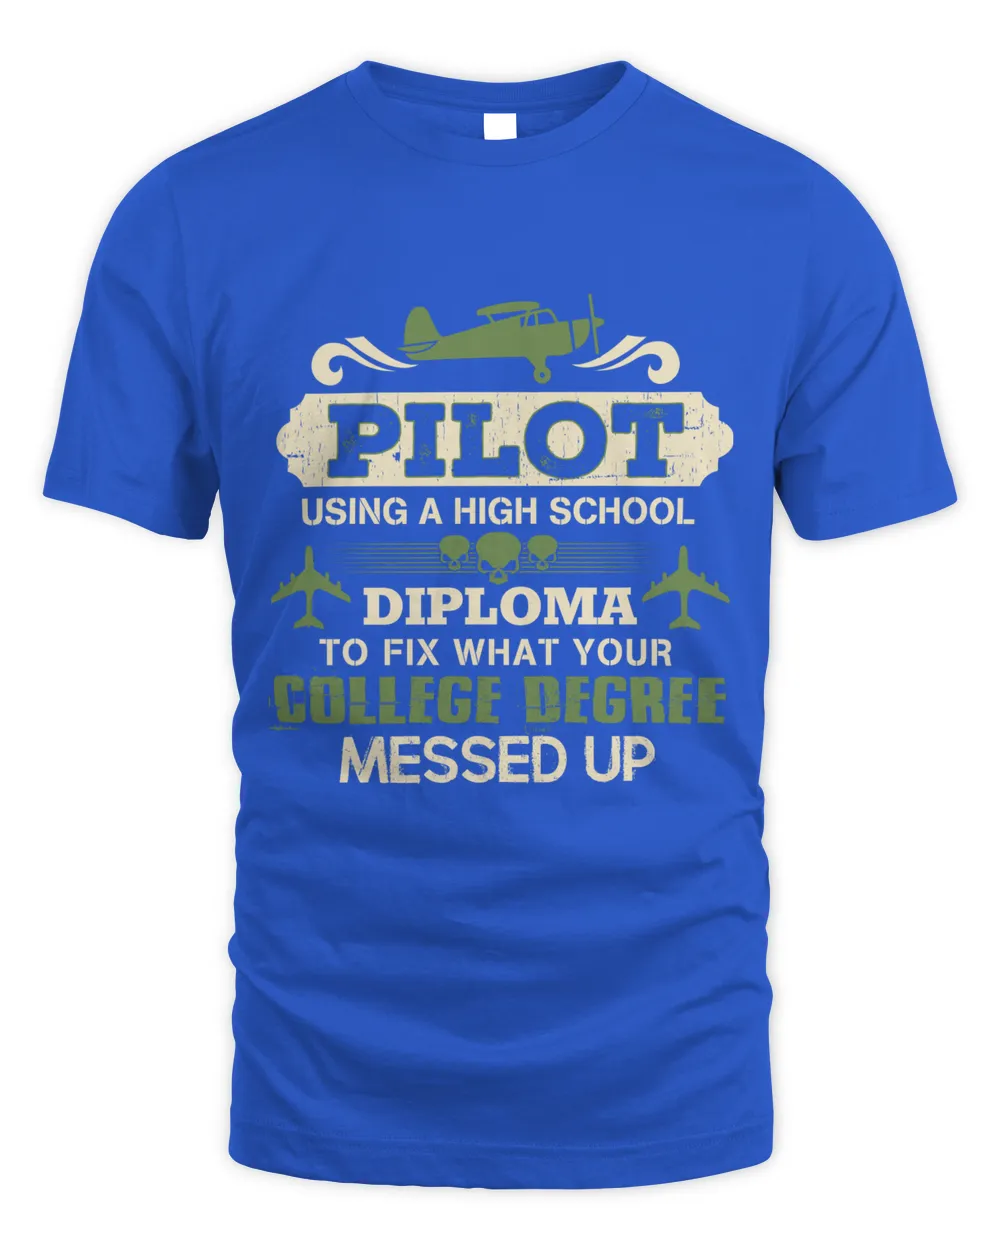 Pilot using a high school diploma to fix what your college degree messed up